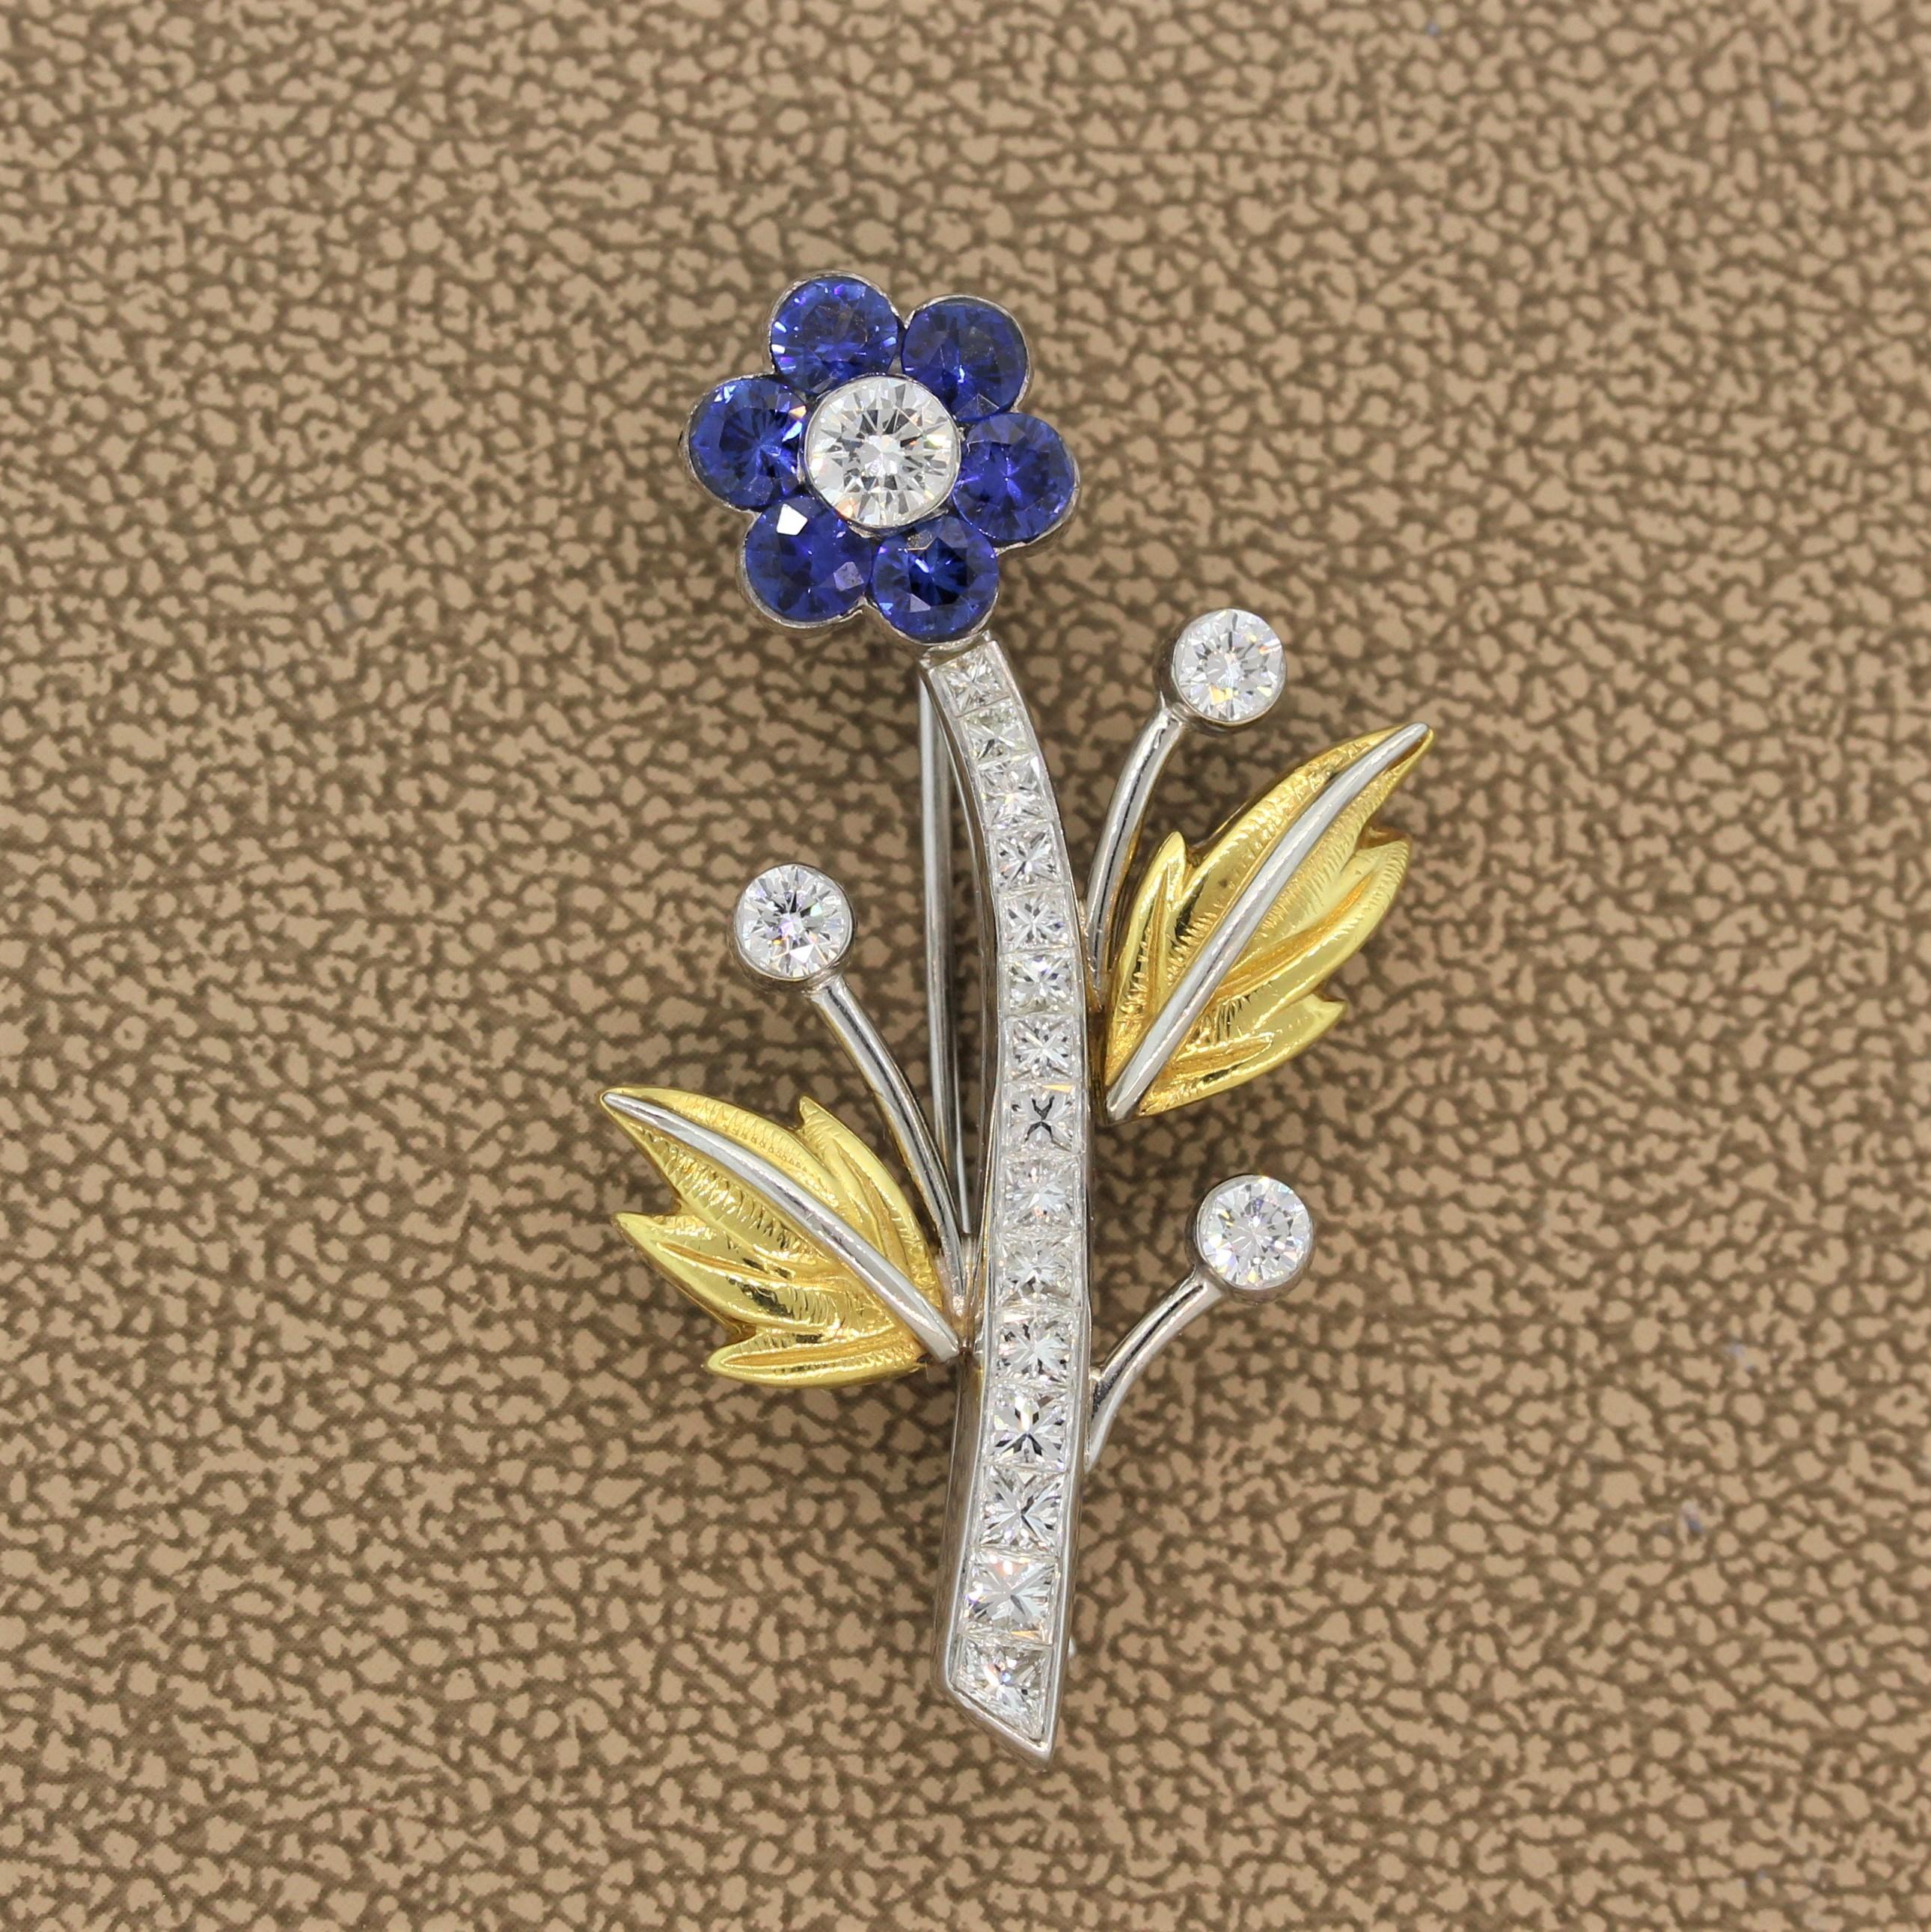 A flower brooch featuring 1.50 carats of round cut blue sapphires set as petals and 1.85 carats of round cut diamonds set on the stem, pistil and accenting leaves. The flower is set in platinum with two leaves made of 18K yellow gold with a soft